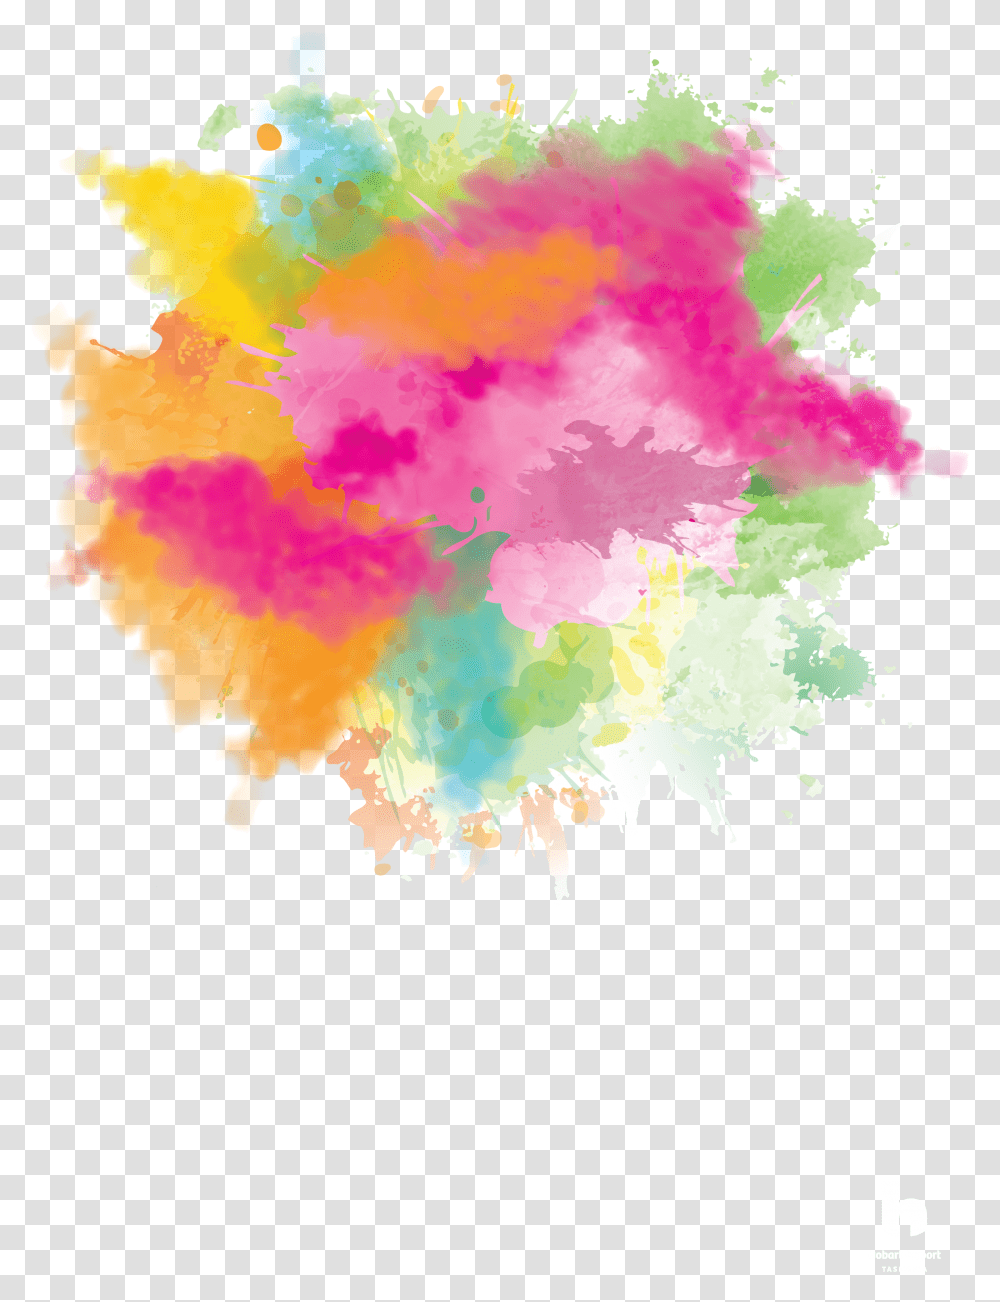 Download Hd 15c Mostly Cloudy Image Splatter High Resolution Watercolor Paint, Graphics, Art, Modern Art, Plot Transparent Png